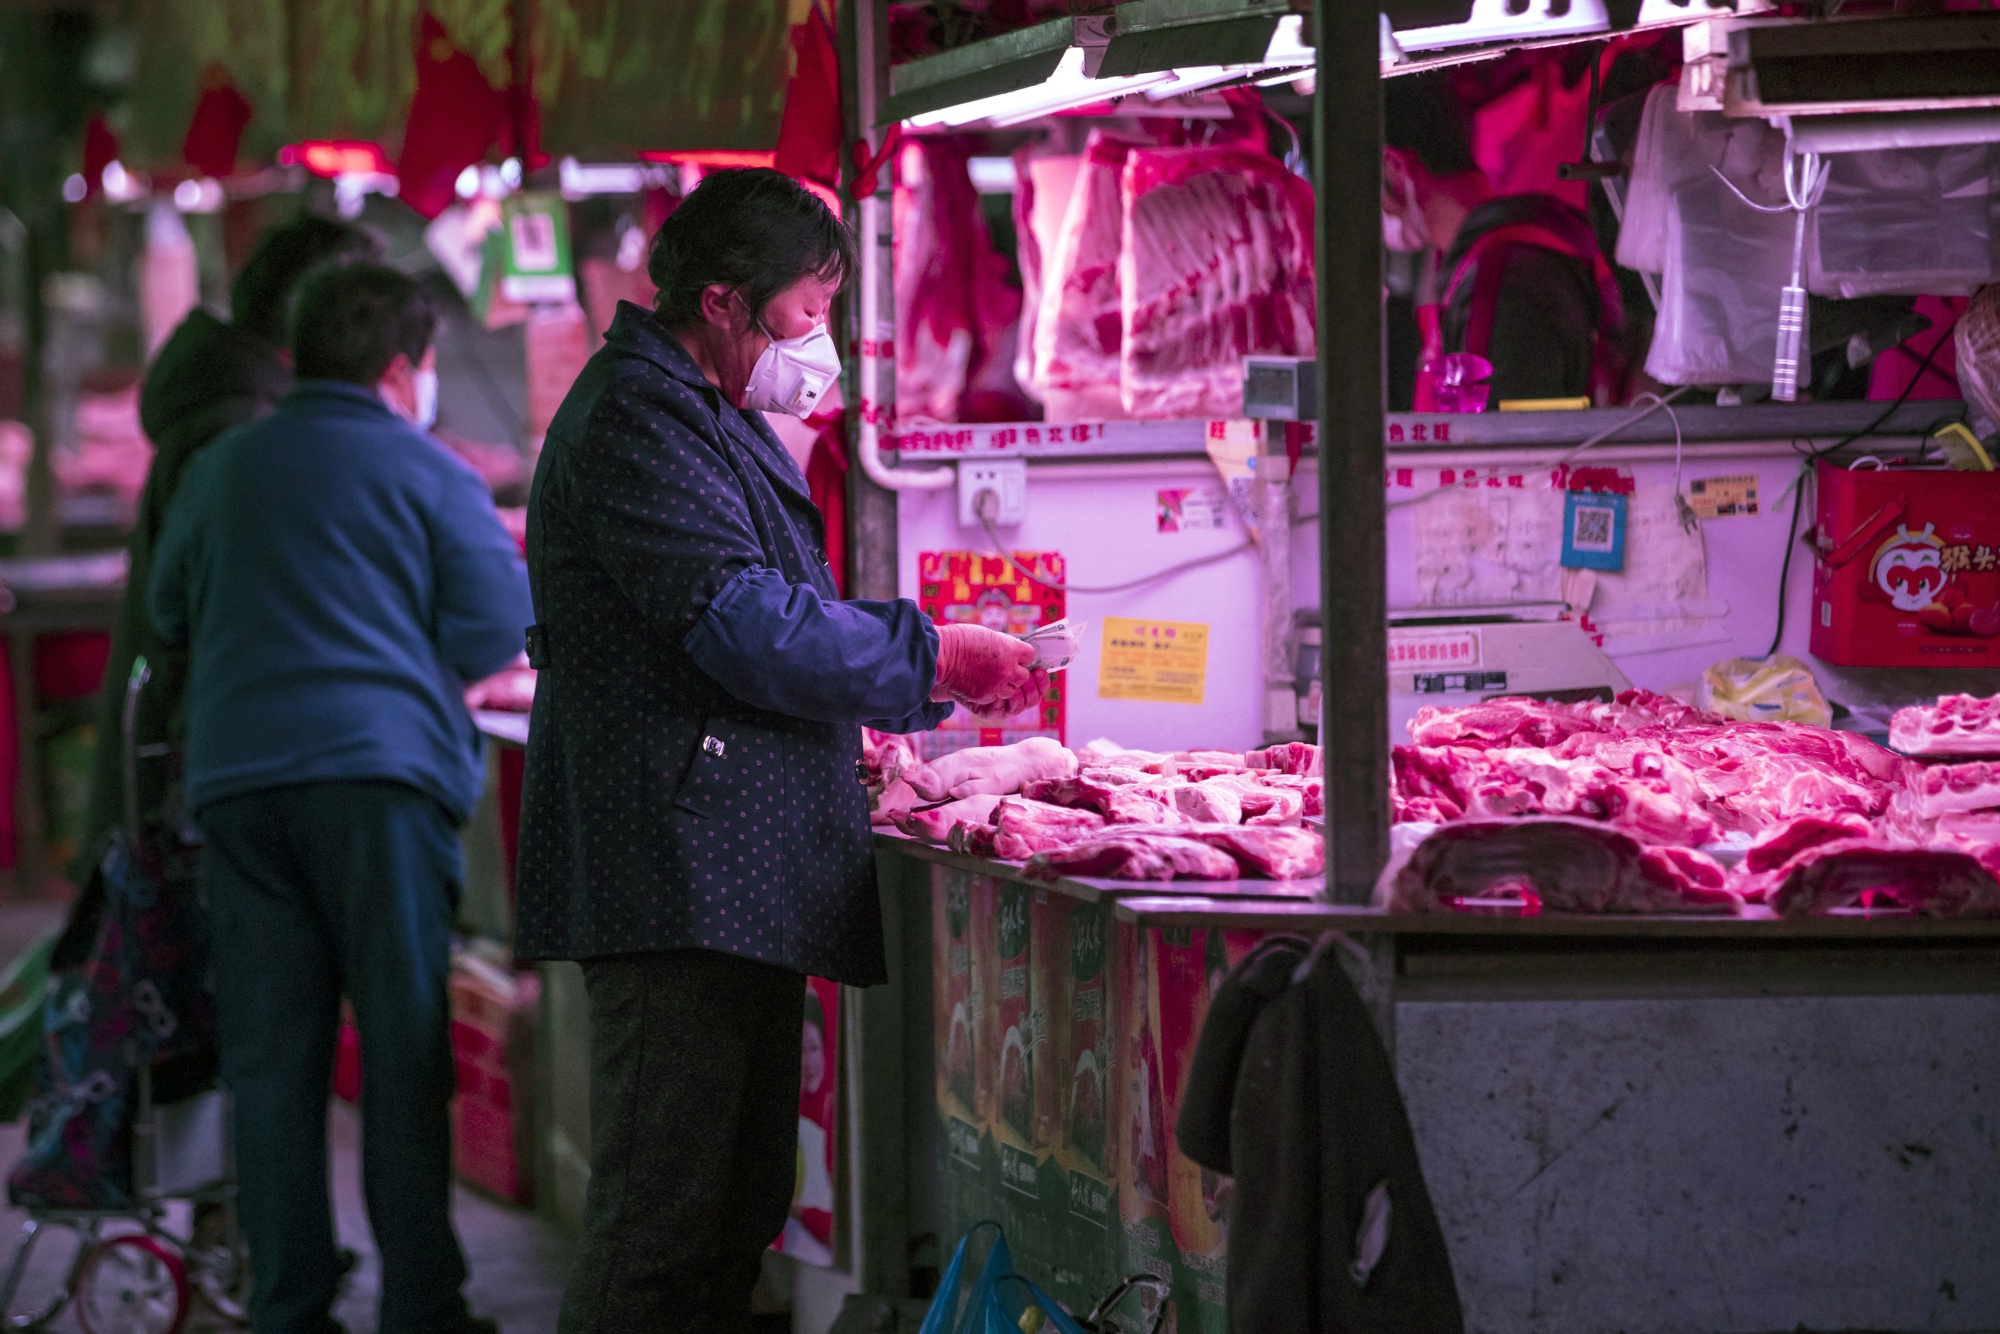 The pork price surge is driven by increased demand for cured and preserved meat ahead of the Lunar New Year.